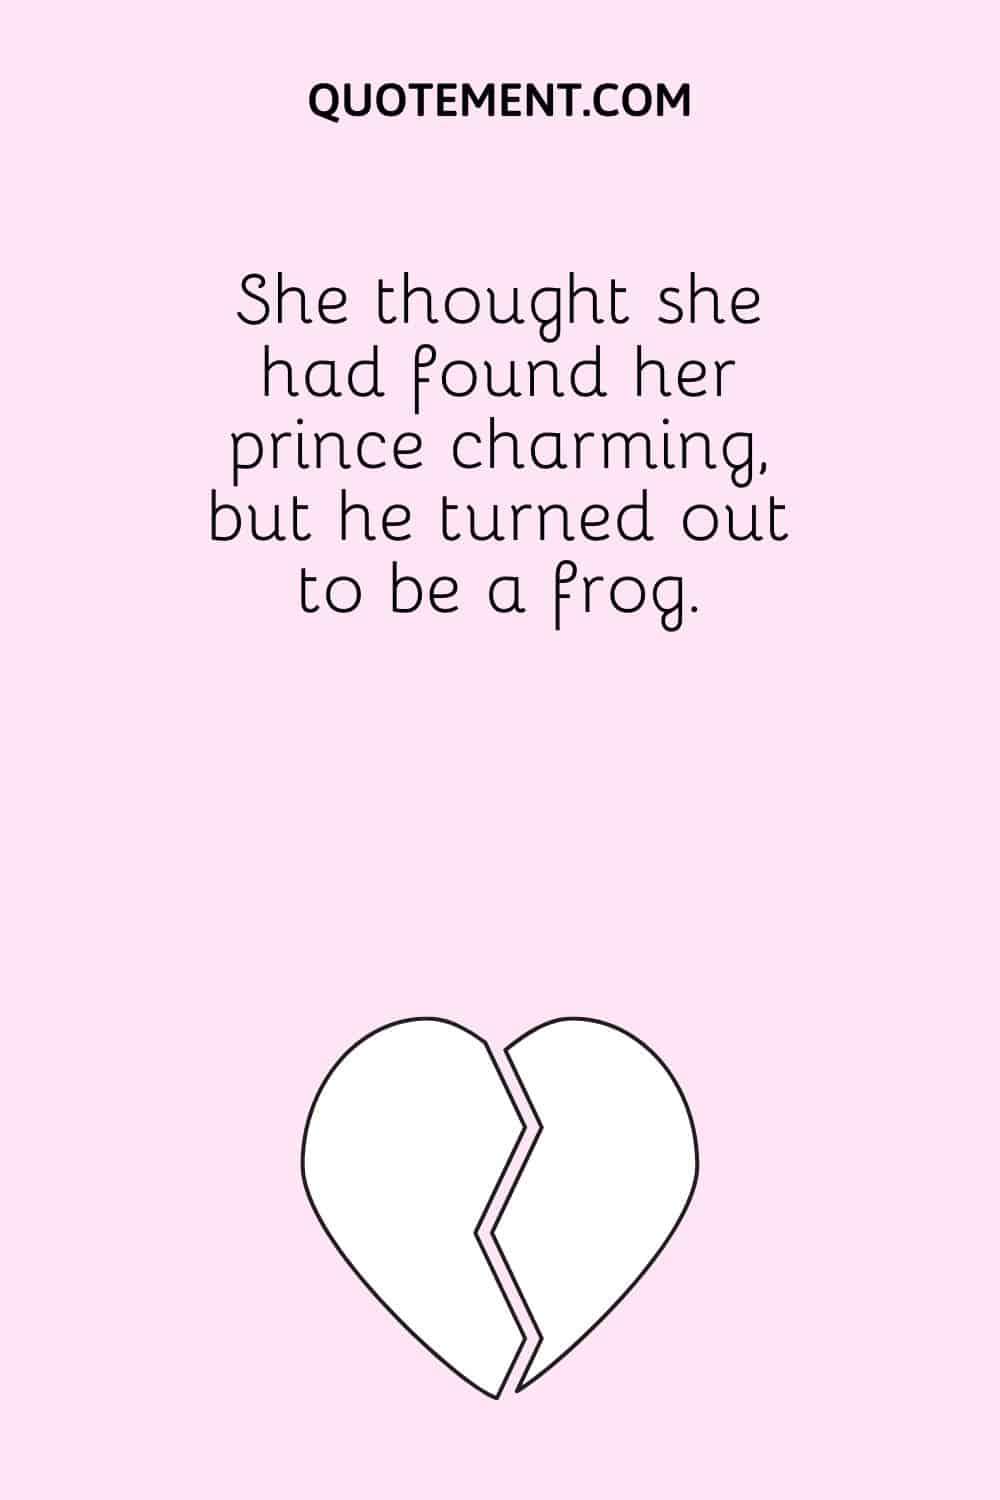 She thought she had found her prince charming, but he turned out to be a frog.